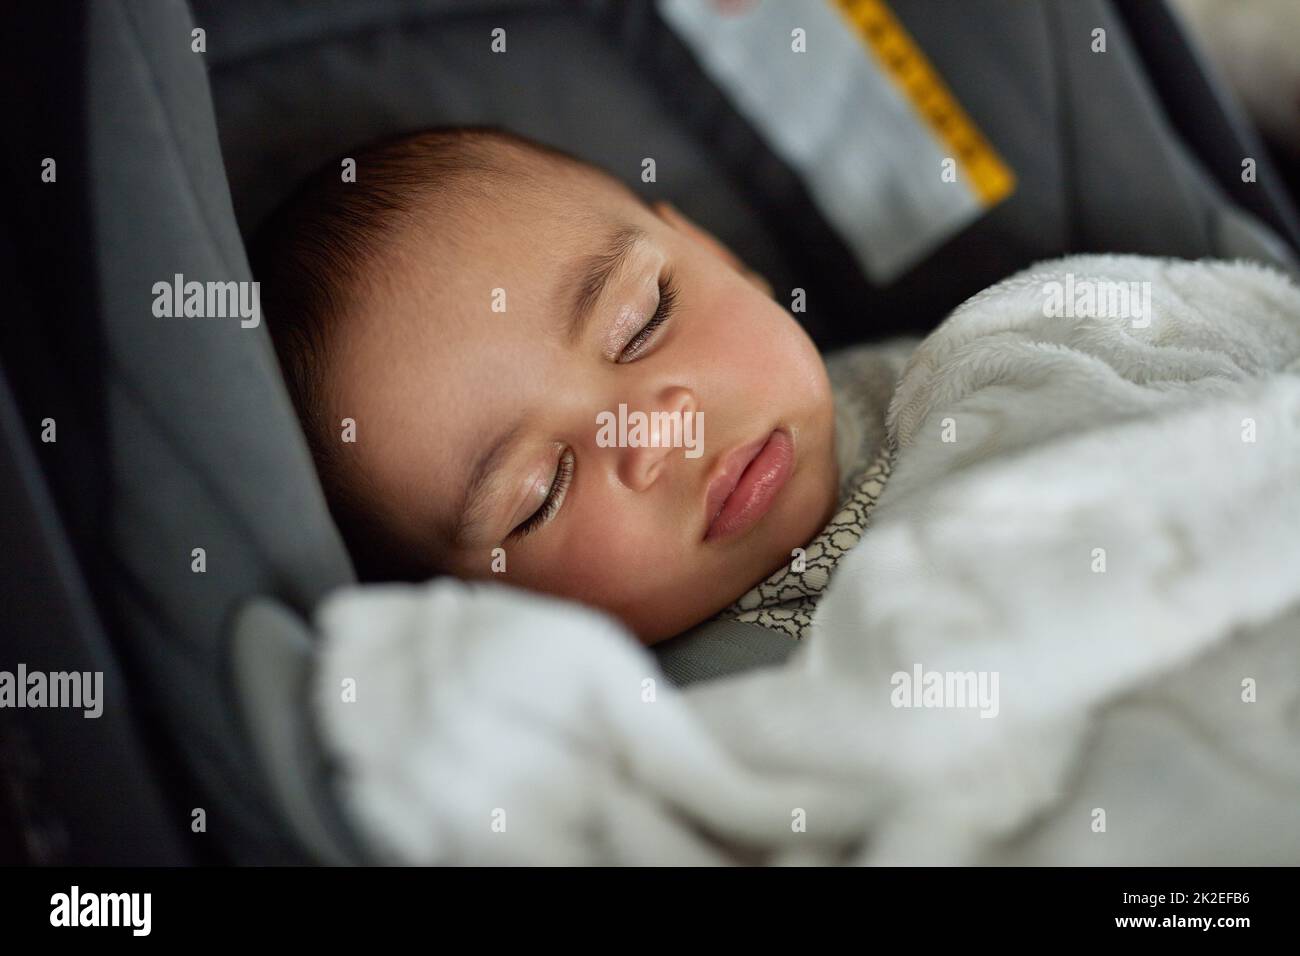 This car trip is going to be a dream. Shot of an adorable baby boy sleeping in a car seat. Stock Photo